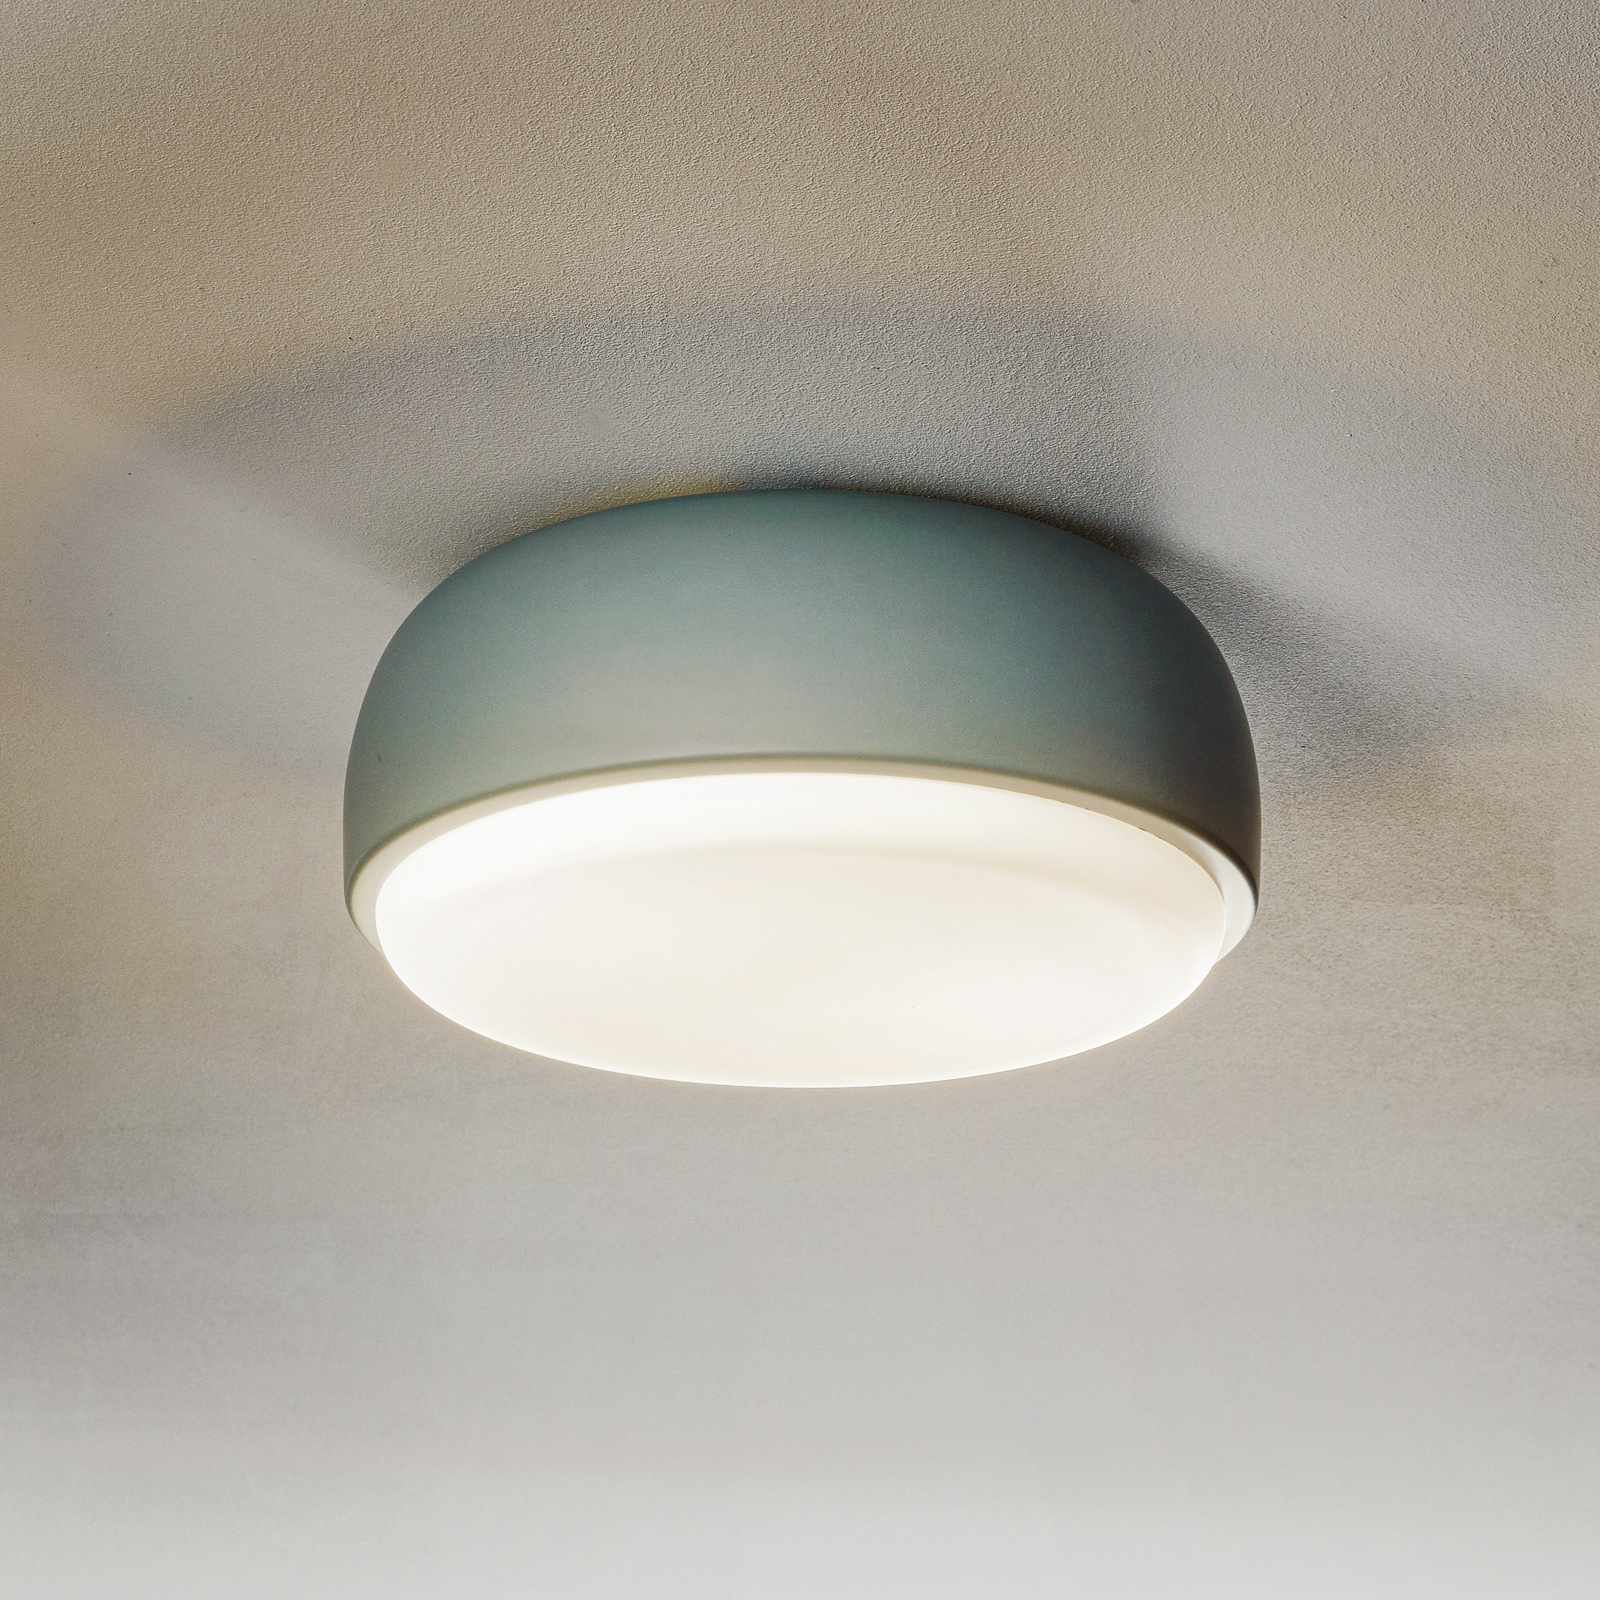 Northern Over Me ceiling light, pale blue 30 cm